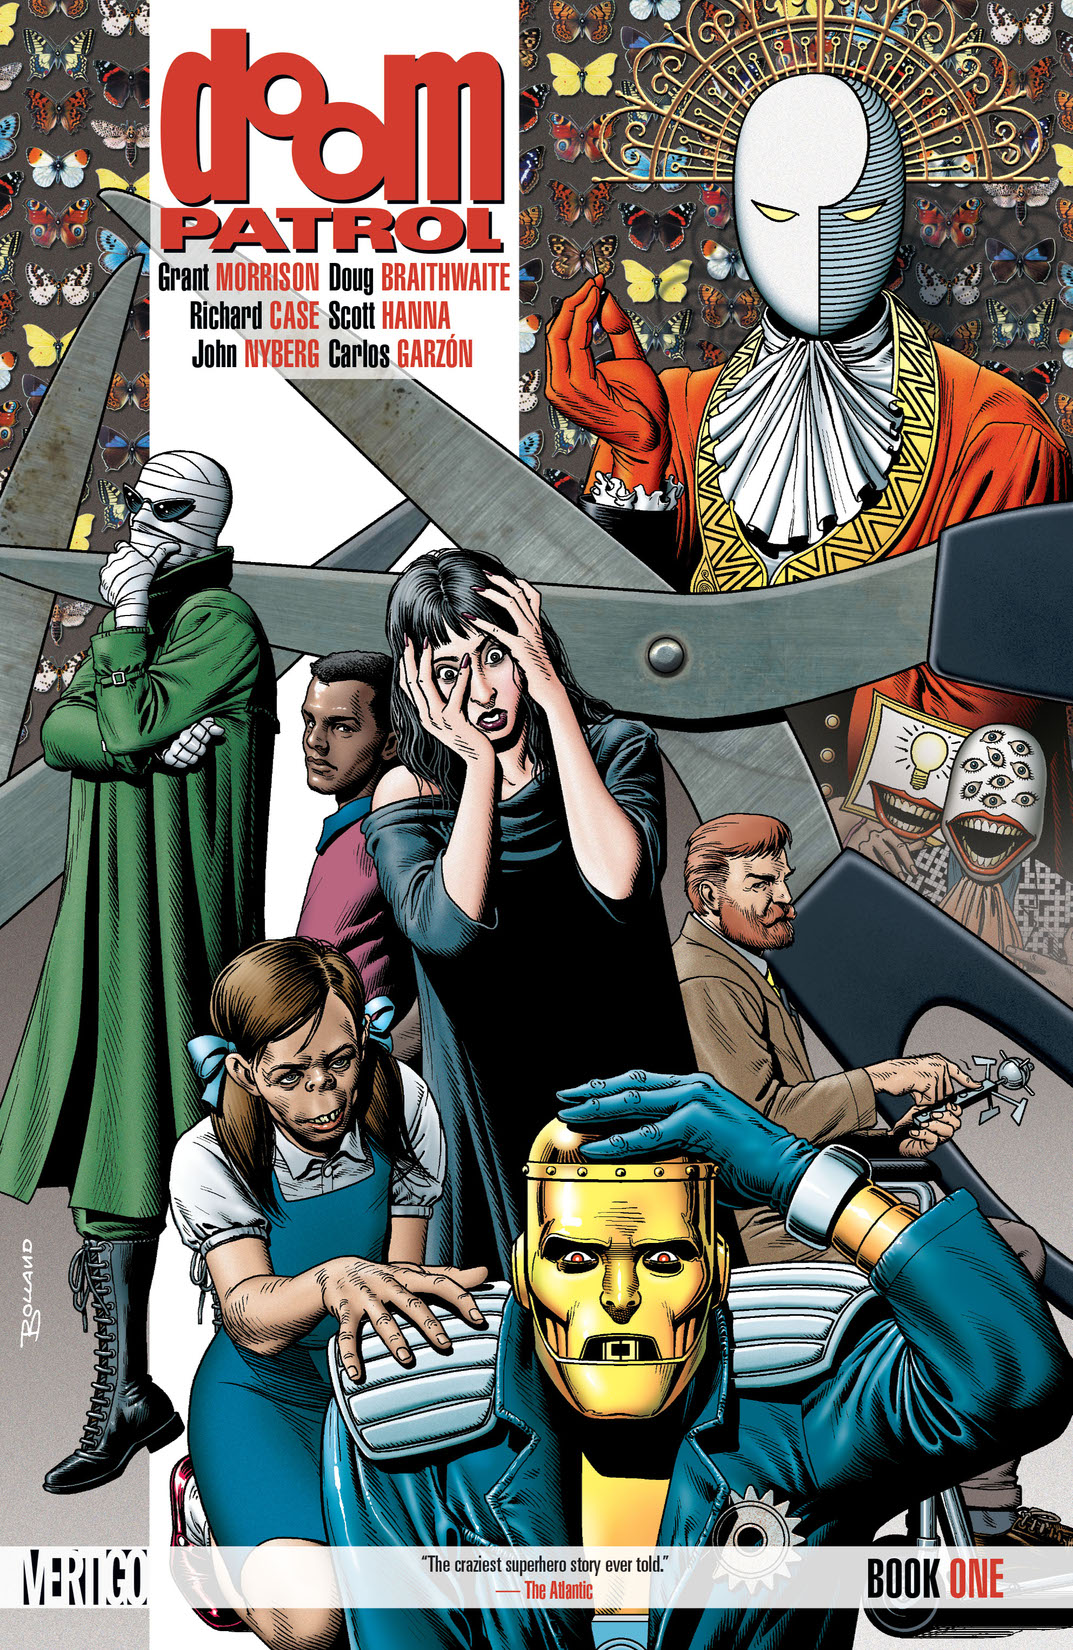 Doom Patrol Book One preview images